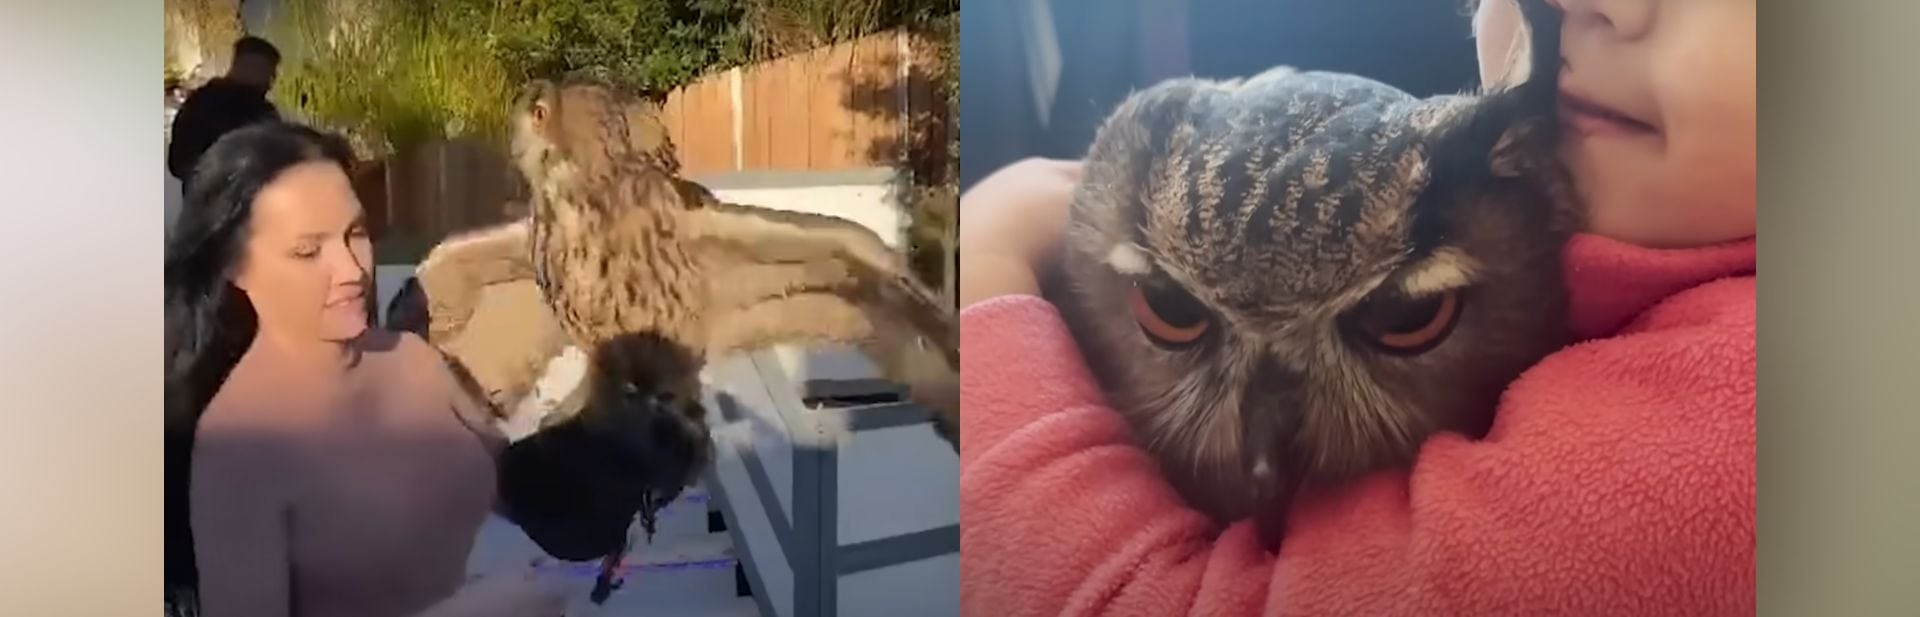 Sweet Owl Warms Heart as She Embraces Unexpected Role to Human Siblings